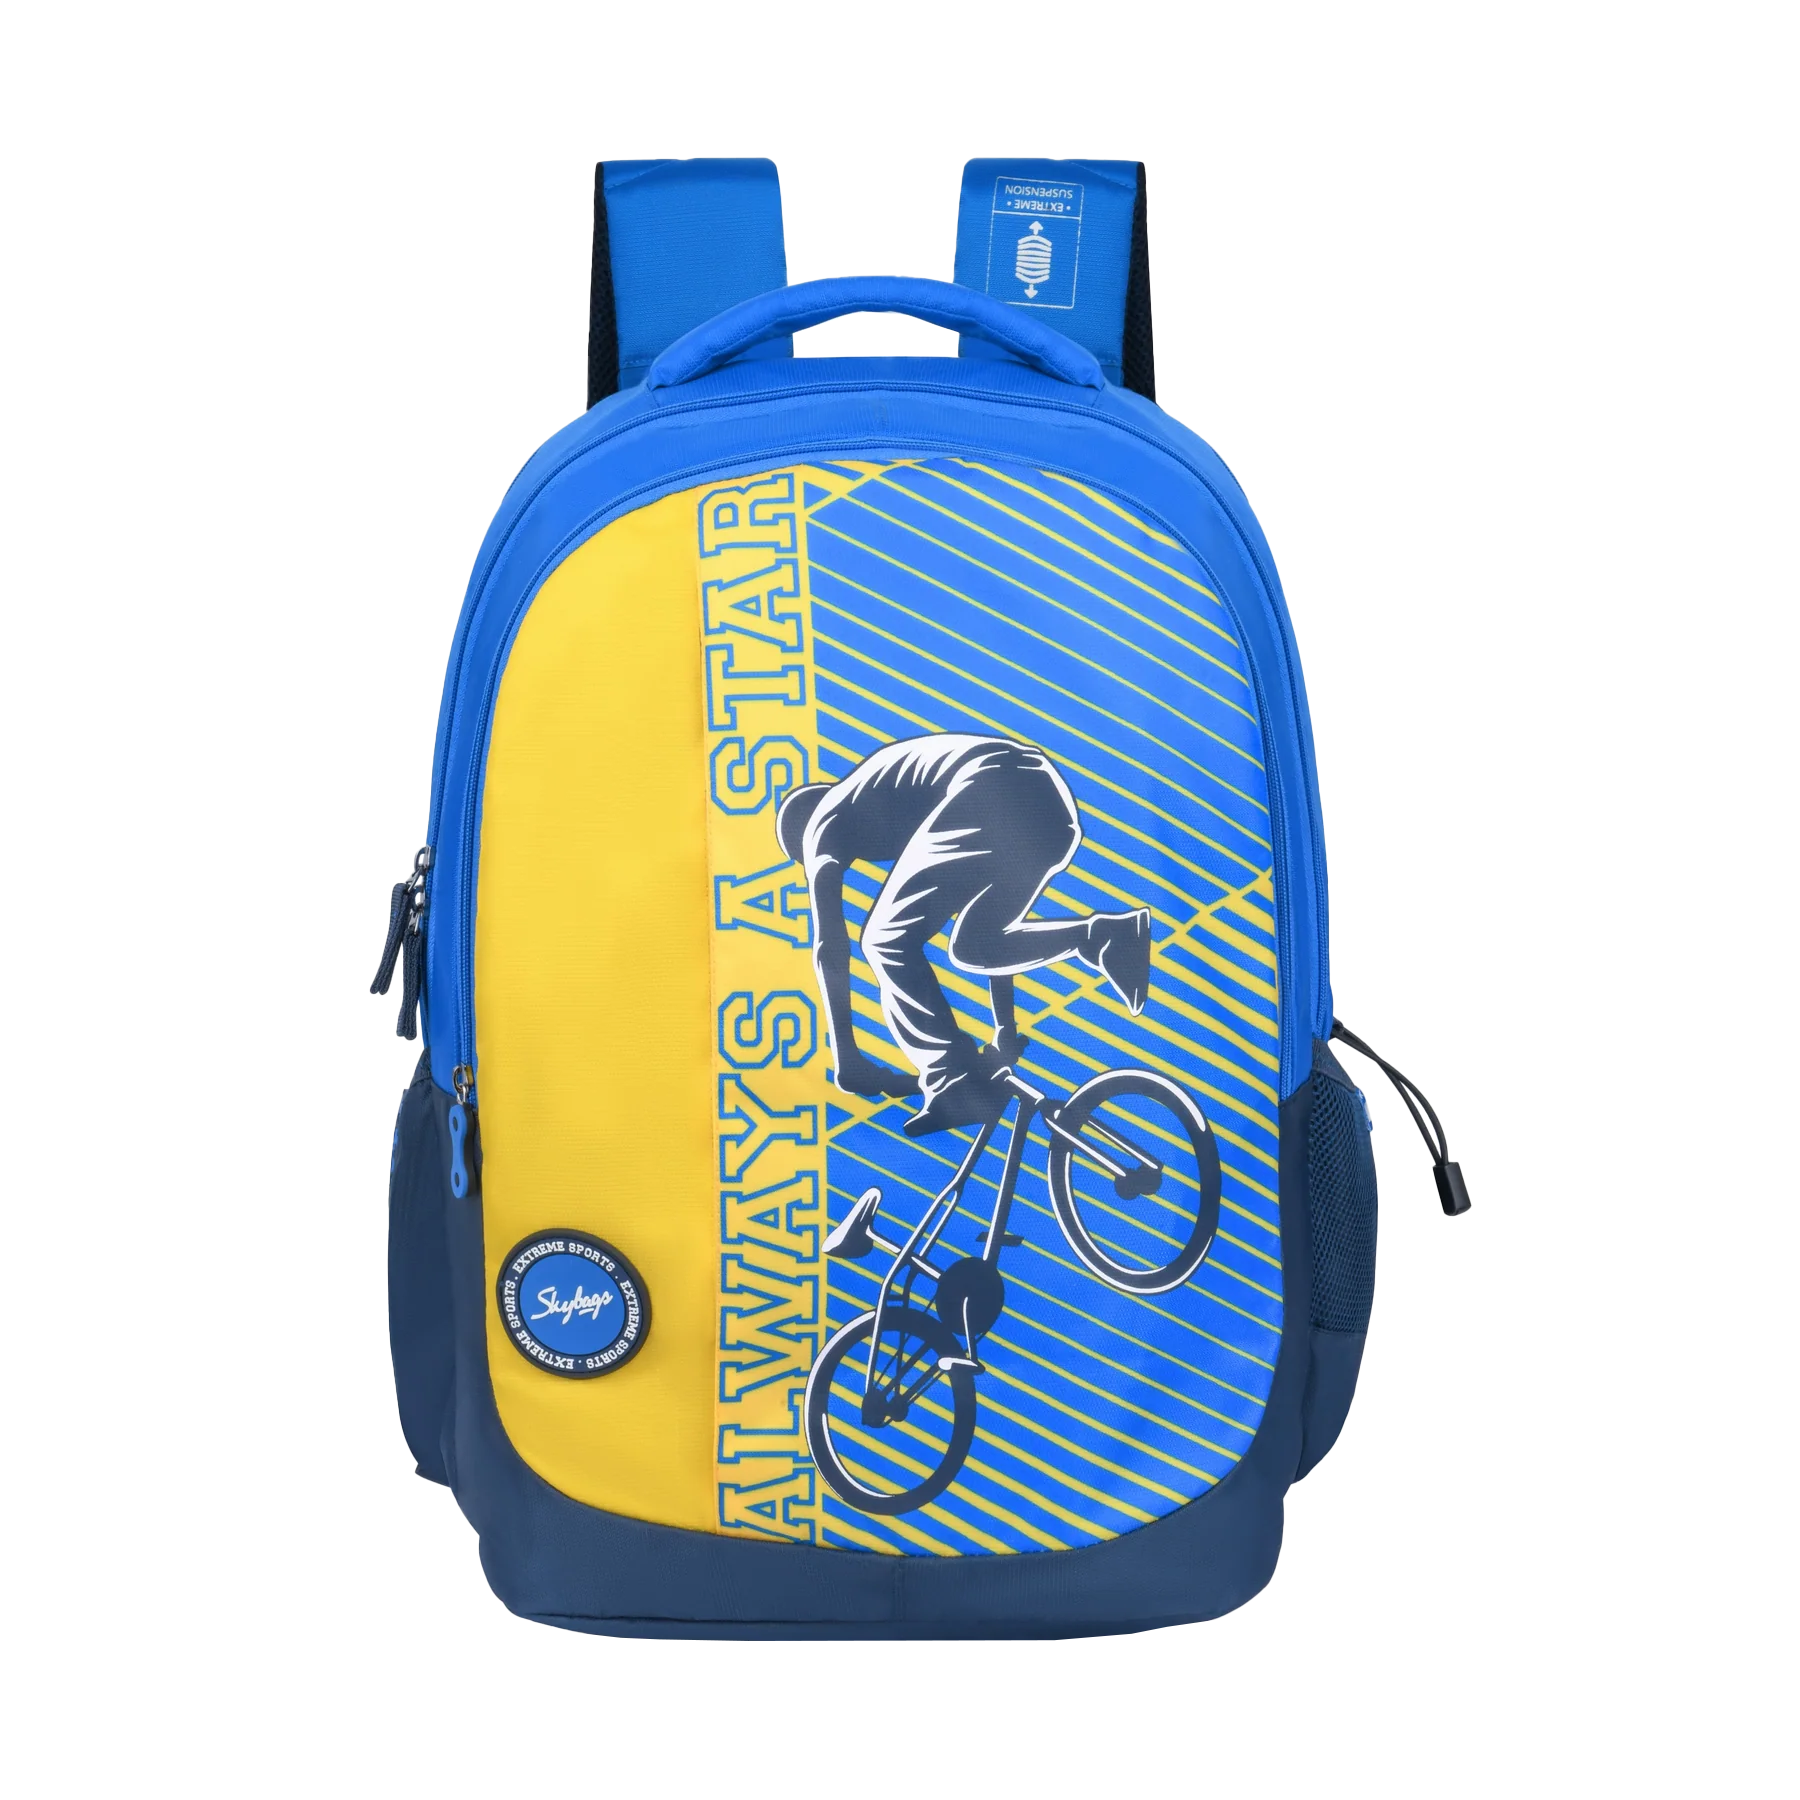 Skybags Squad Pro 01, 38 L Backpack Blue, SQUAD PRO 01BLU